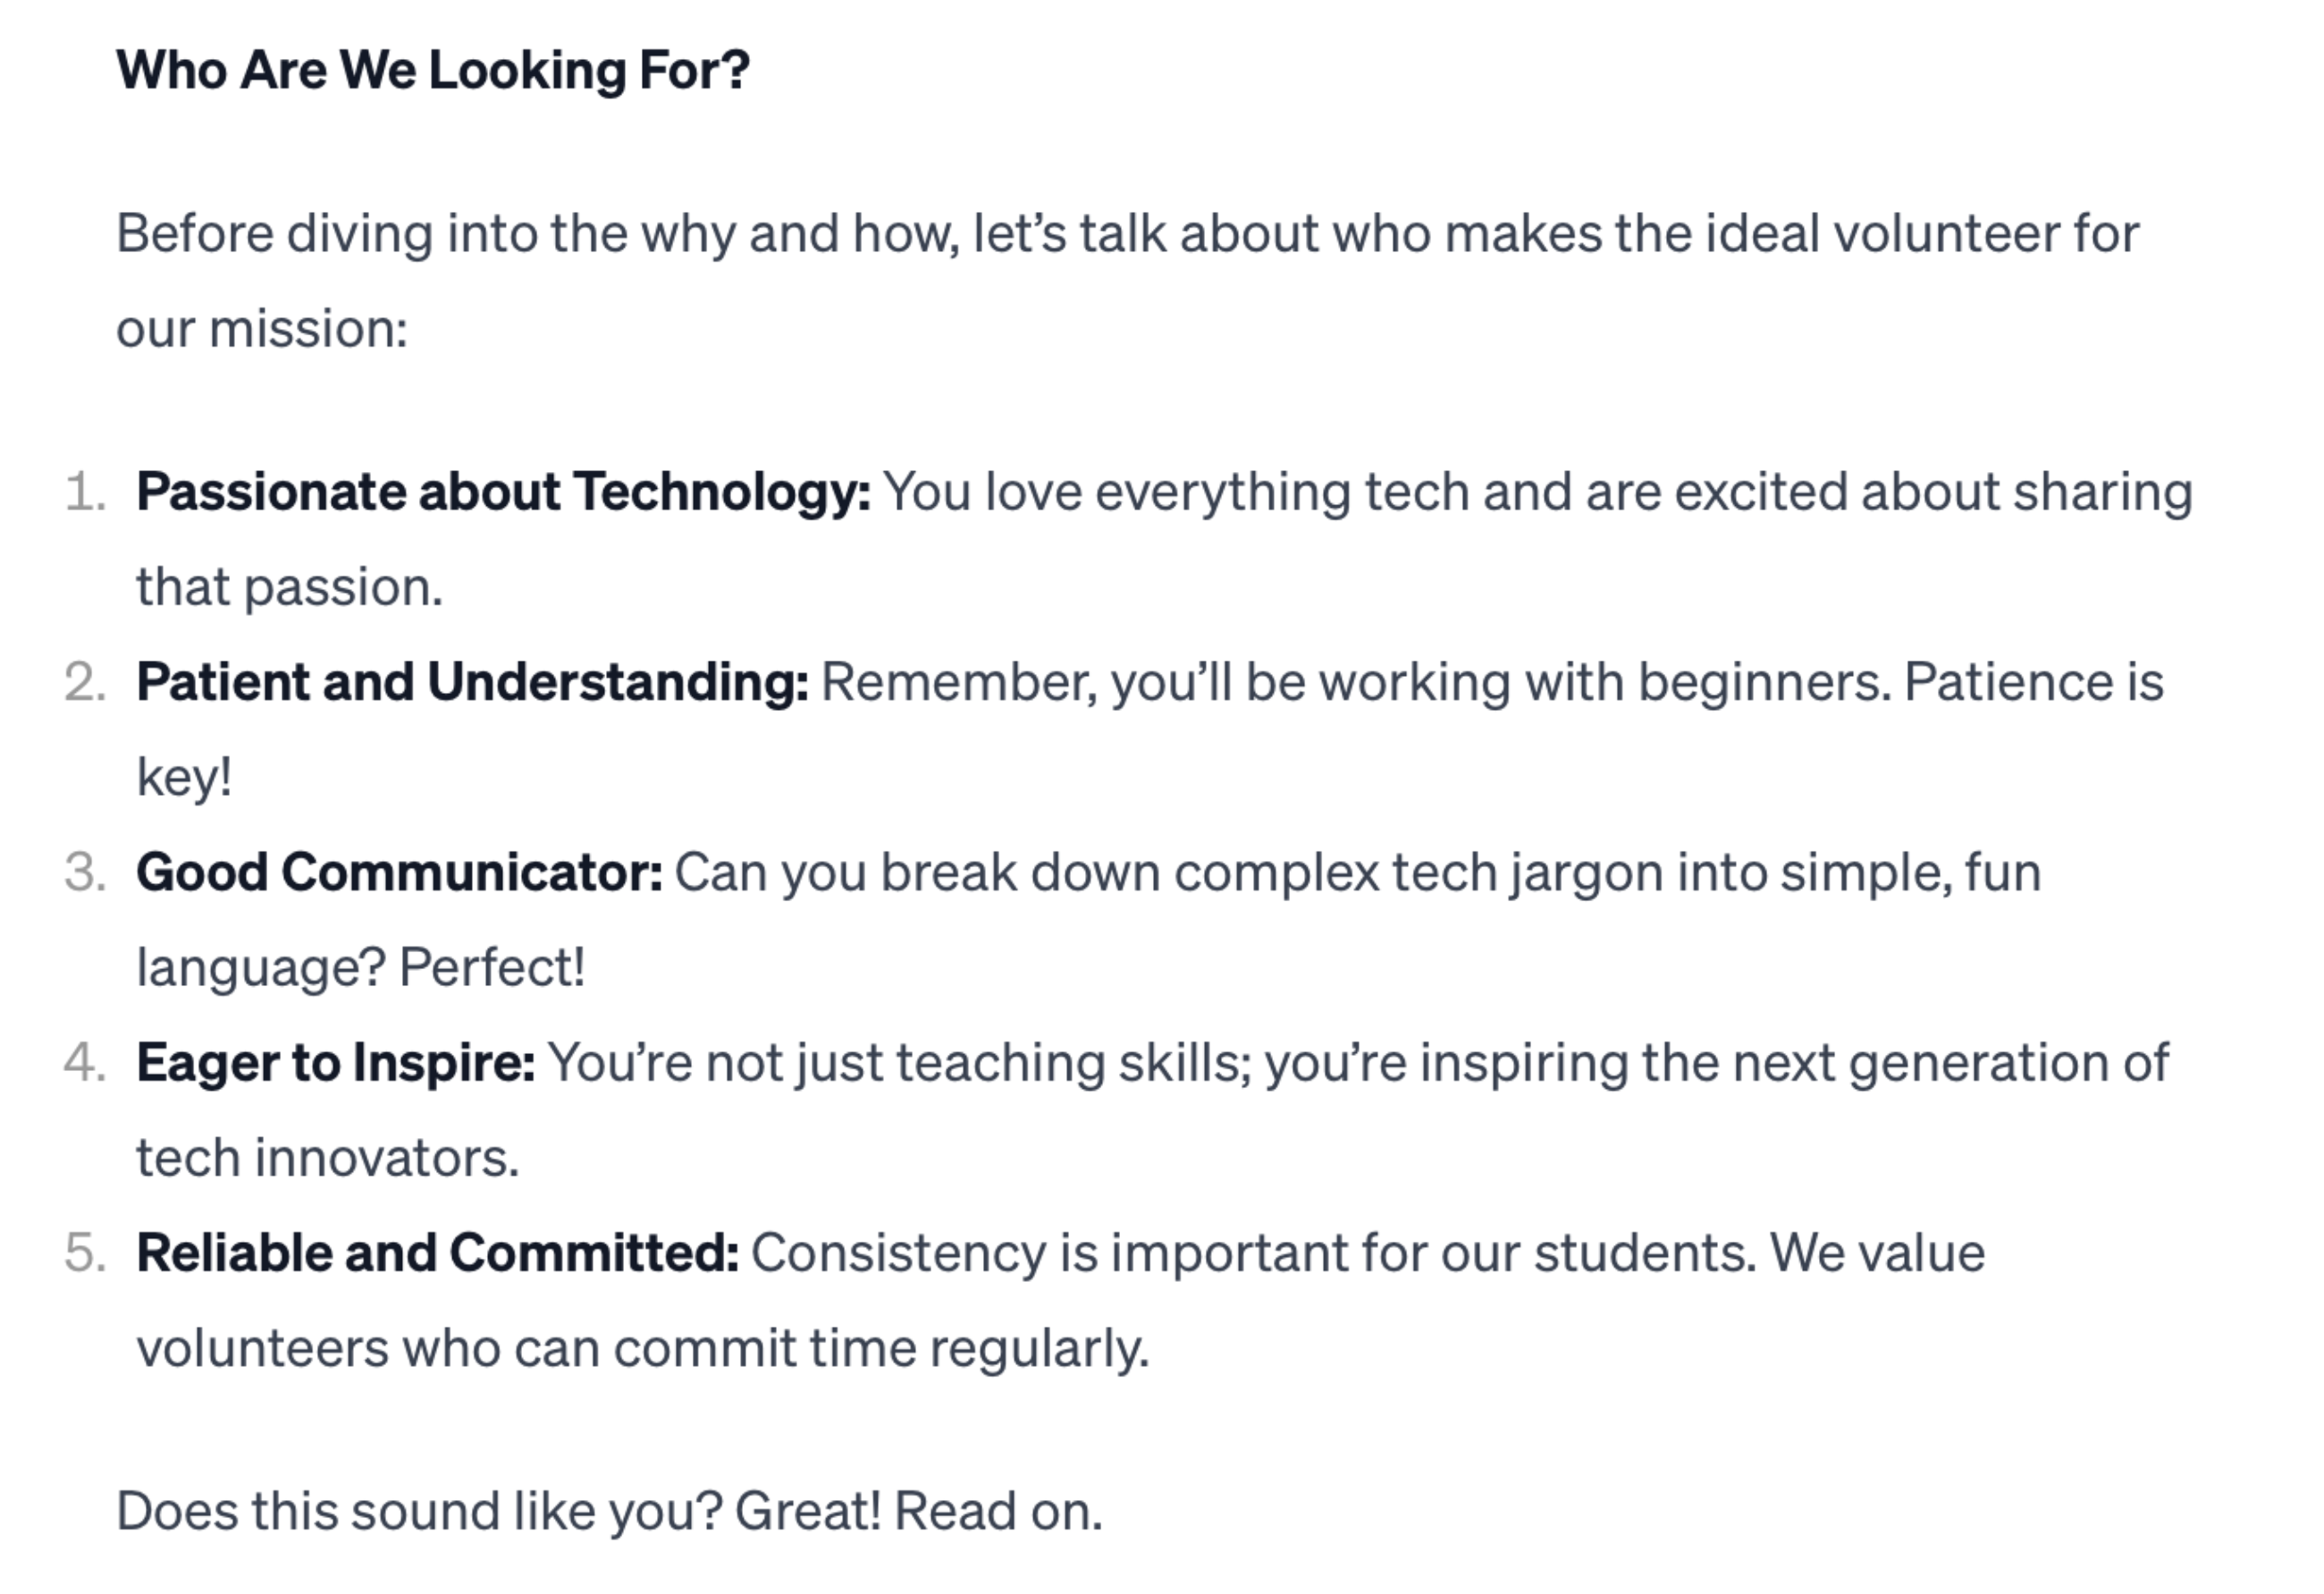 Who Are We Looking For?

Before diving into the why and how, let’s talk about who makes the ideal volunteer for our mission:

Passionate about Technology: You love everything tech and are excited about sharing that passion.
Patient and Understanding: Remember, you’ll be working with beginners. Patience is key!
Good Communicator: Can you break down complex tech jargon into simple, fun language? Perfect!
Eager to Inspire: You’re not just teaching skills; you’re inspiring the next generation of tech innovators.
Reliable and Committed: Consistency is important for our students. We value volunteers who can commit time regularly.

Does this sound like you? Great! Read on.